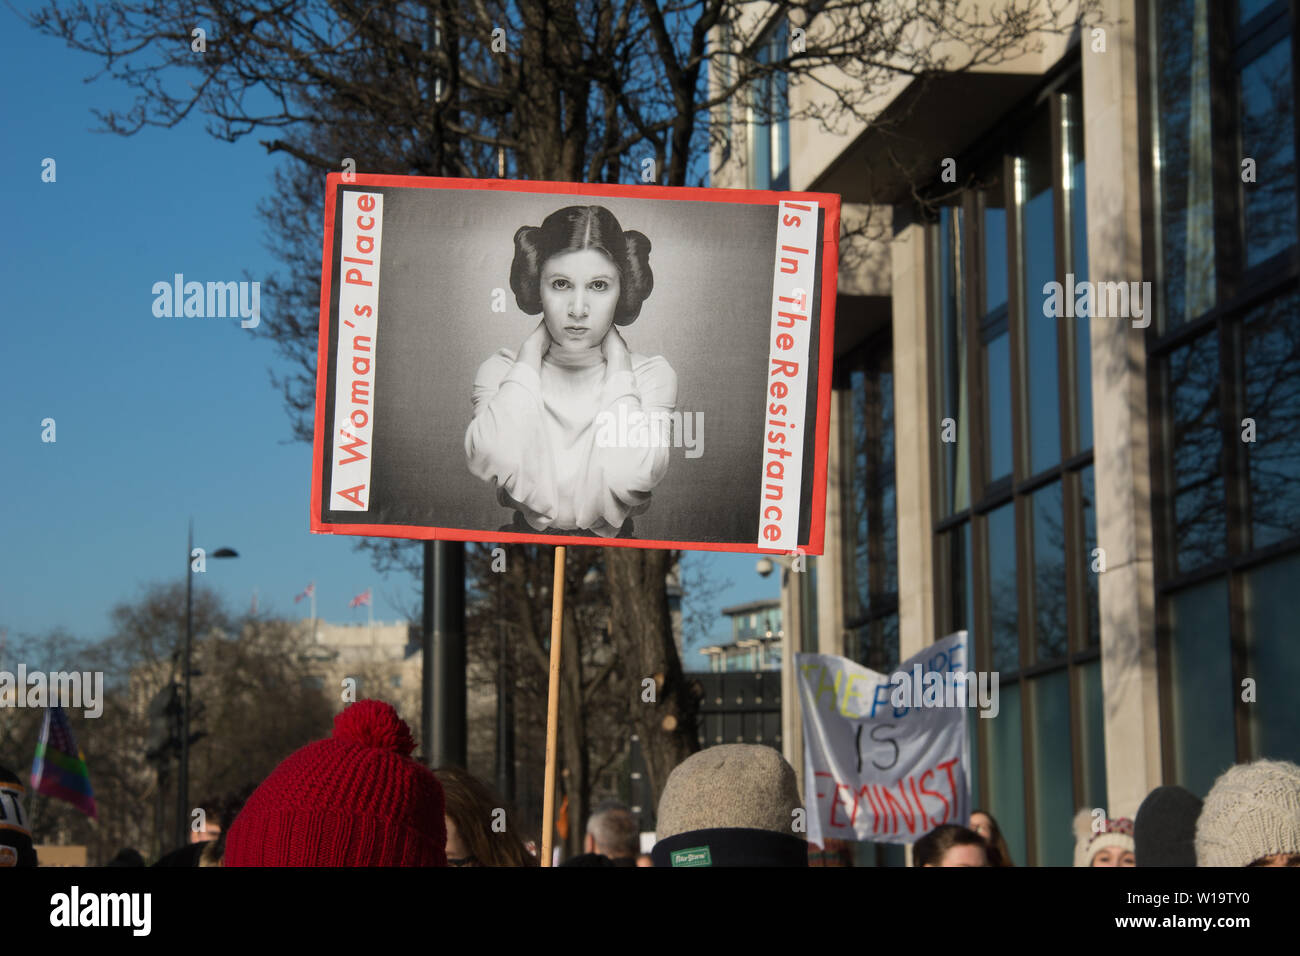 Women's March, London, UK, 21st January 2017. A placard showing Princess Leia and reading 'A woman's place is in the resistance'  is carried as people take to the streets in London for the Wonen's march, to protest the day after the inauguration of President Donald Trump. Up to 10,000 took part in London as women worldwide marked the day by marching in an act of international solidarity. Many carried placards referencing statements made by Donald Trump, considered by many as anti-women or otherwise offensive. Stock Photo